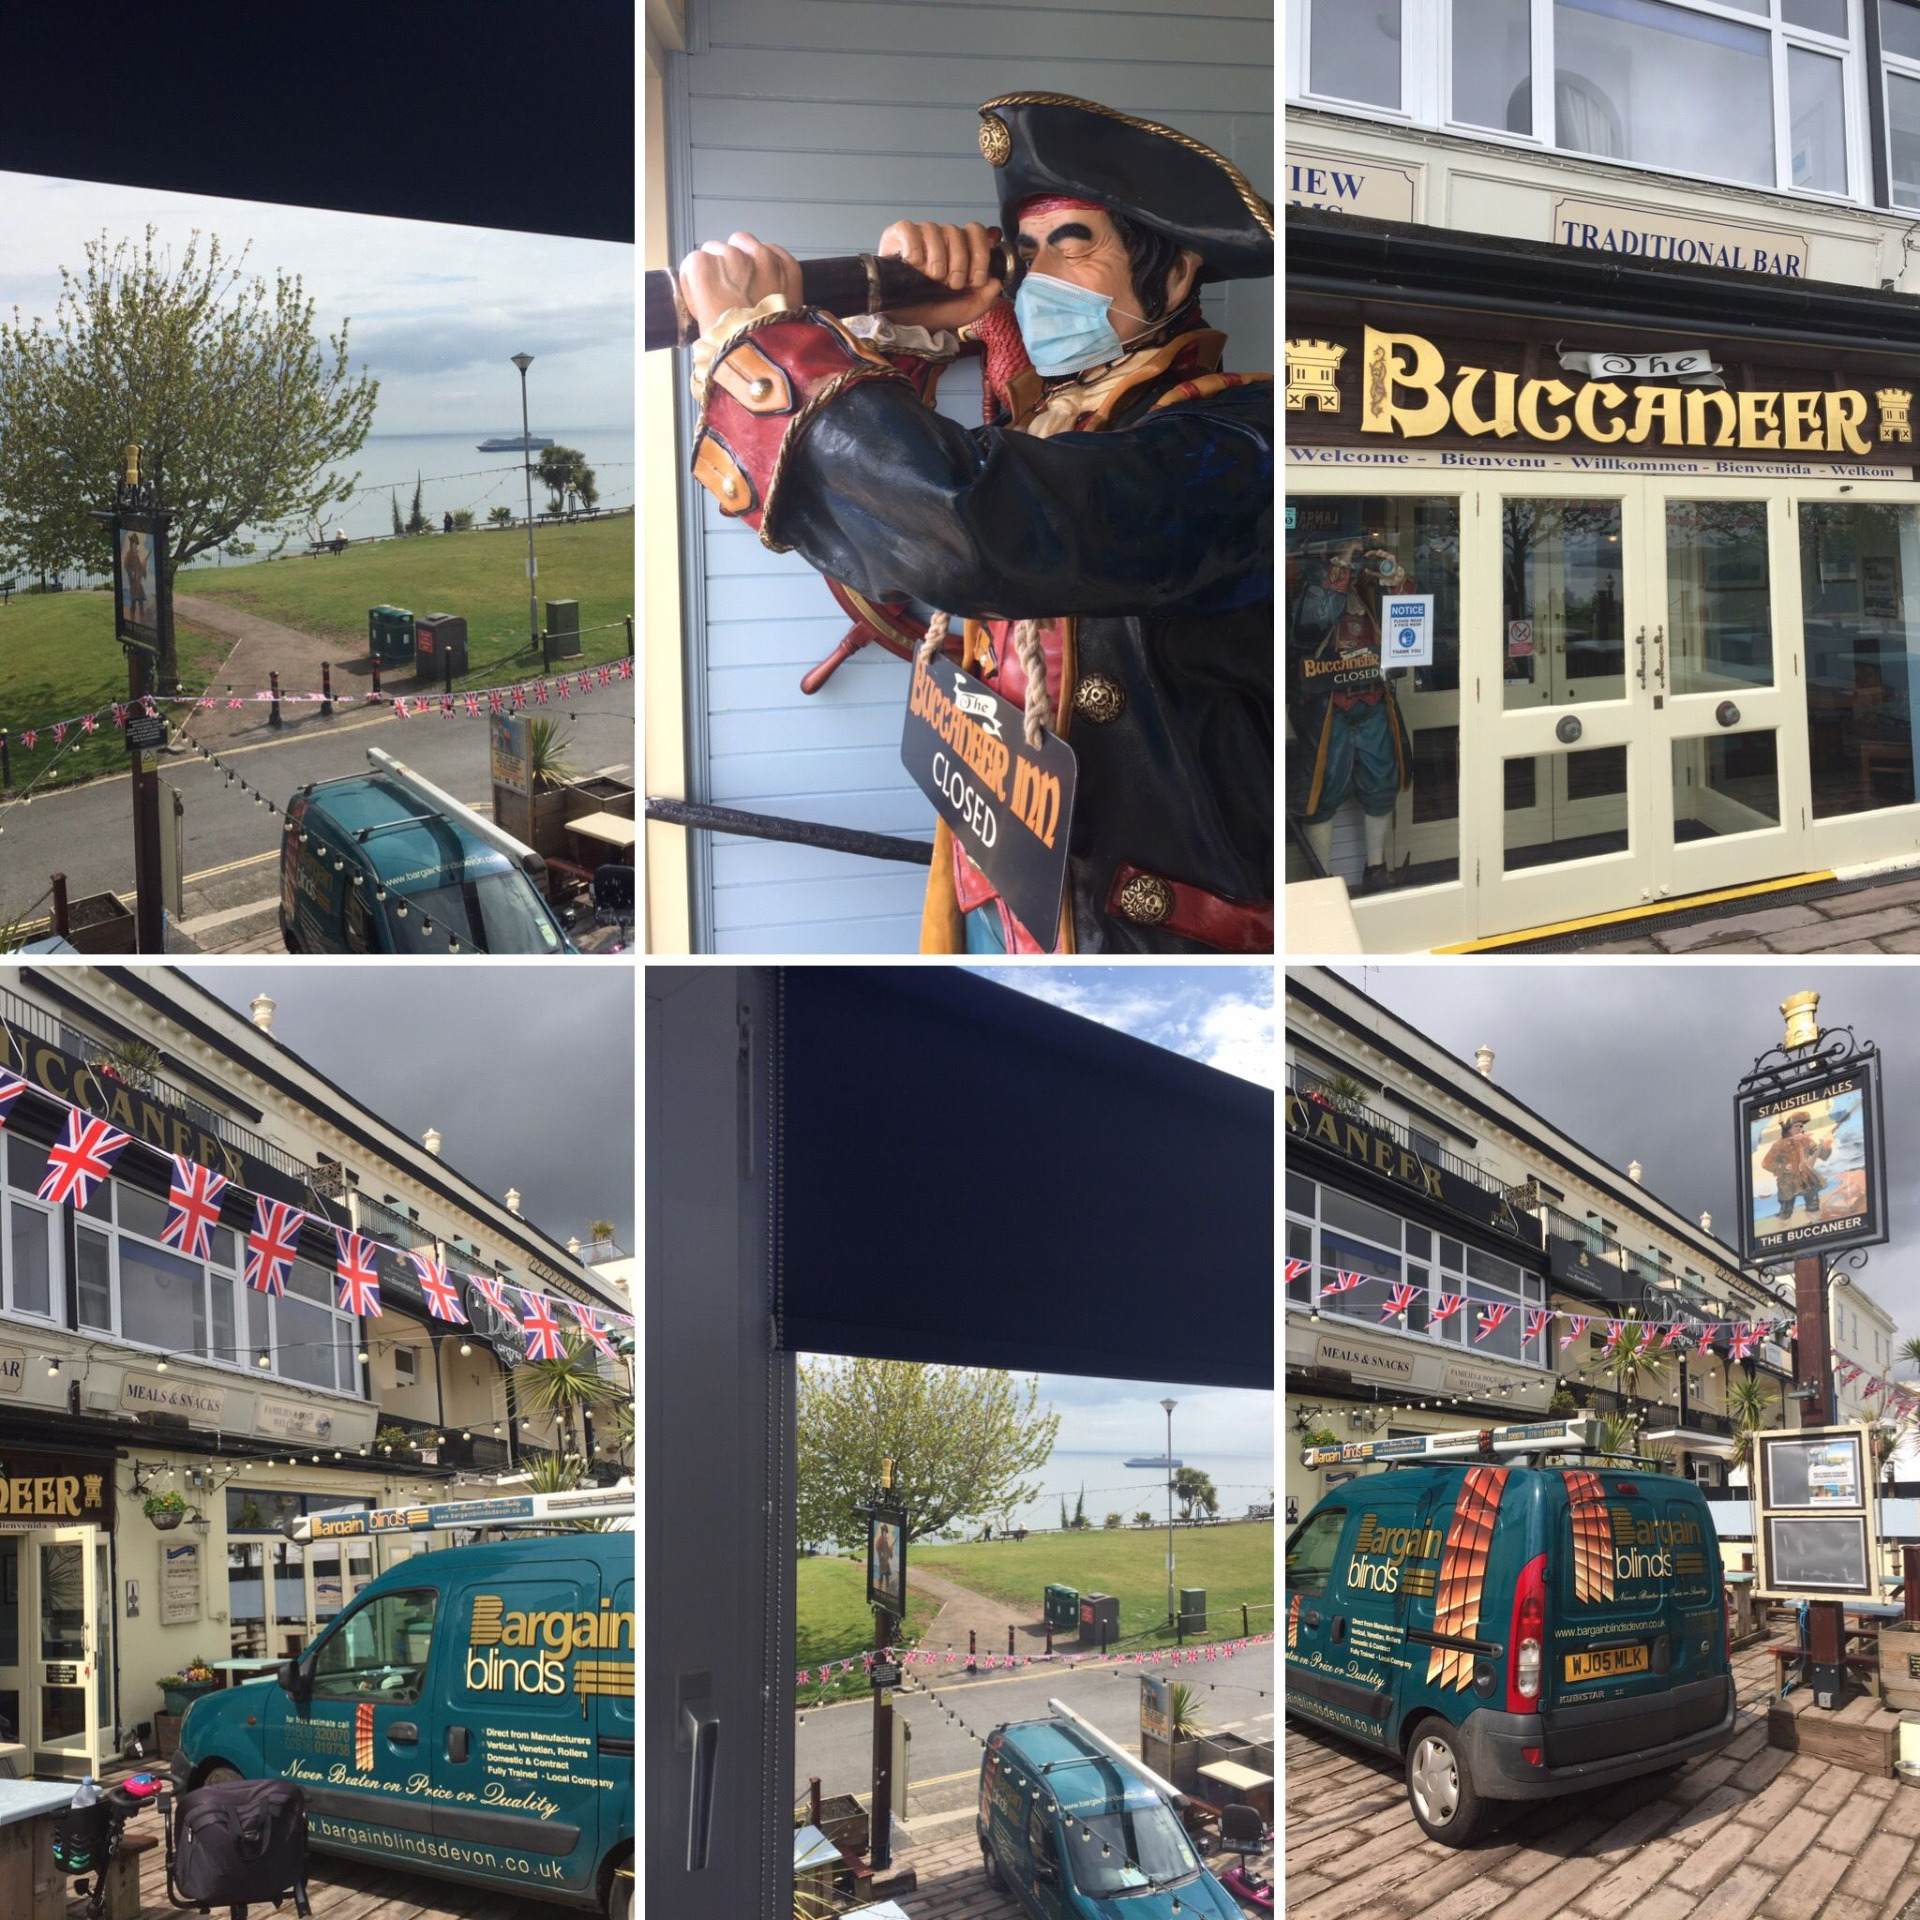 Bespoke made to measure roller blinds, supplied and fitted at the Buccaneer in Torquay, by Bargain Blinds Devon, your local blinds supplier. For high quality blinds in Torquay contact Bargain Blinds today!